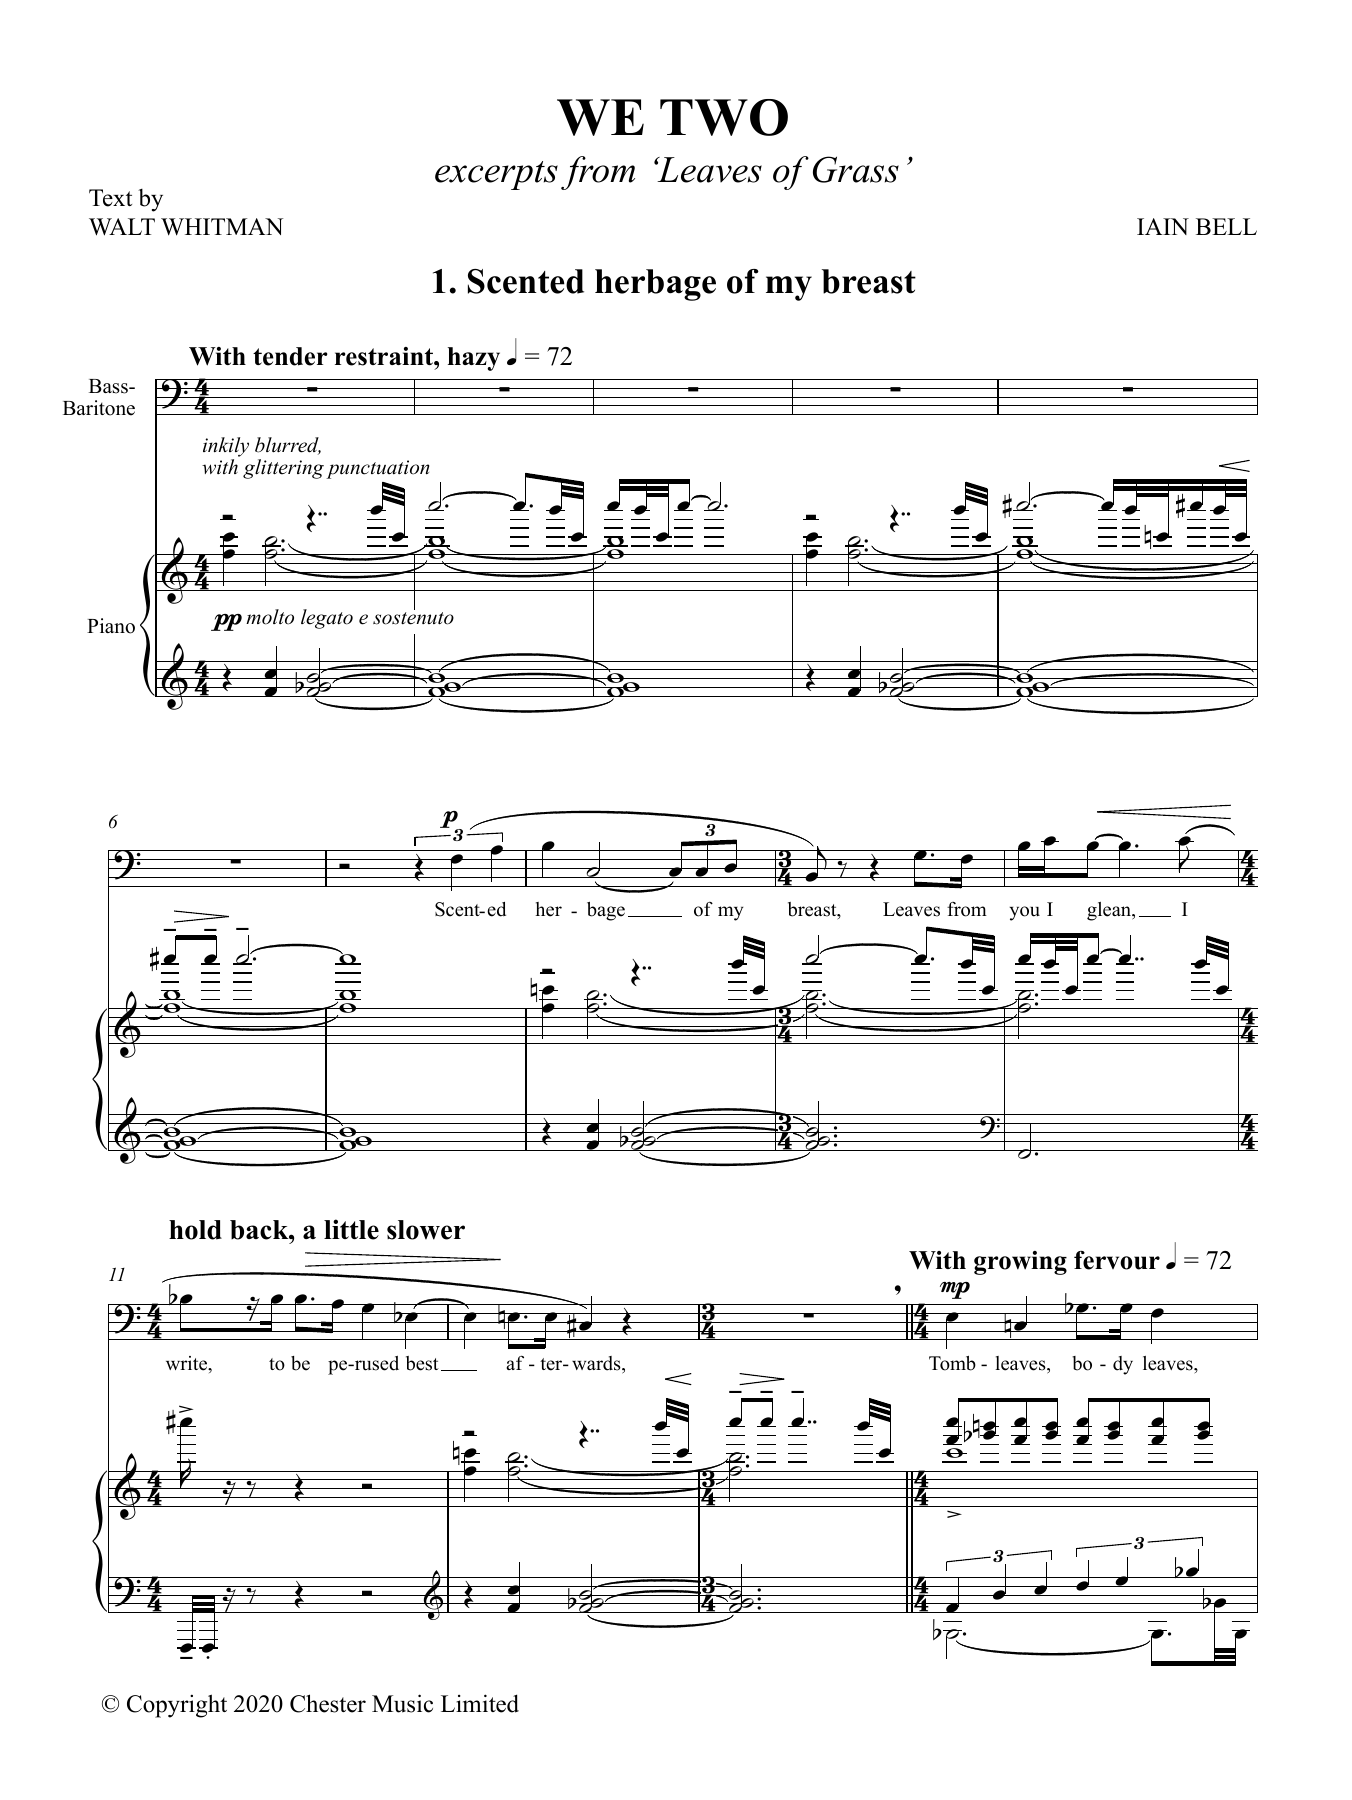 Iain Bell We Two sheet music notes printable PDF score